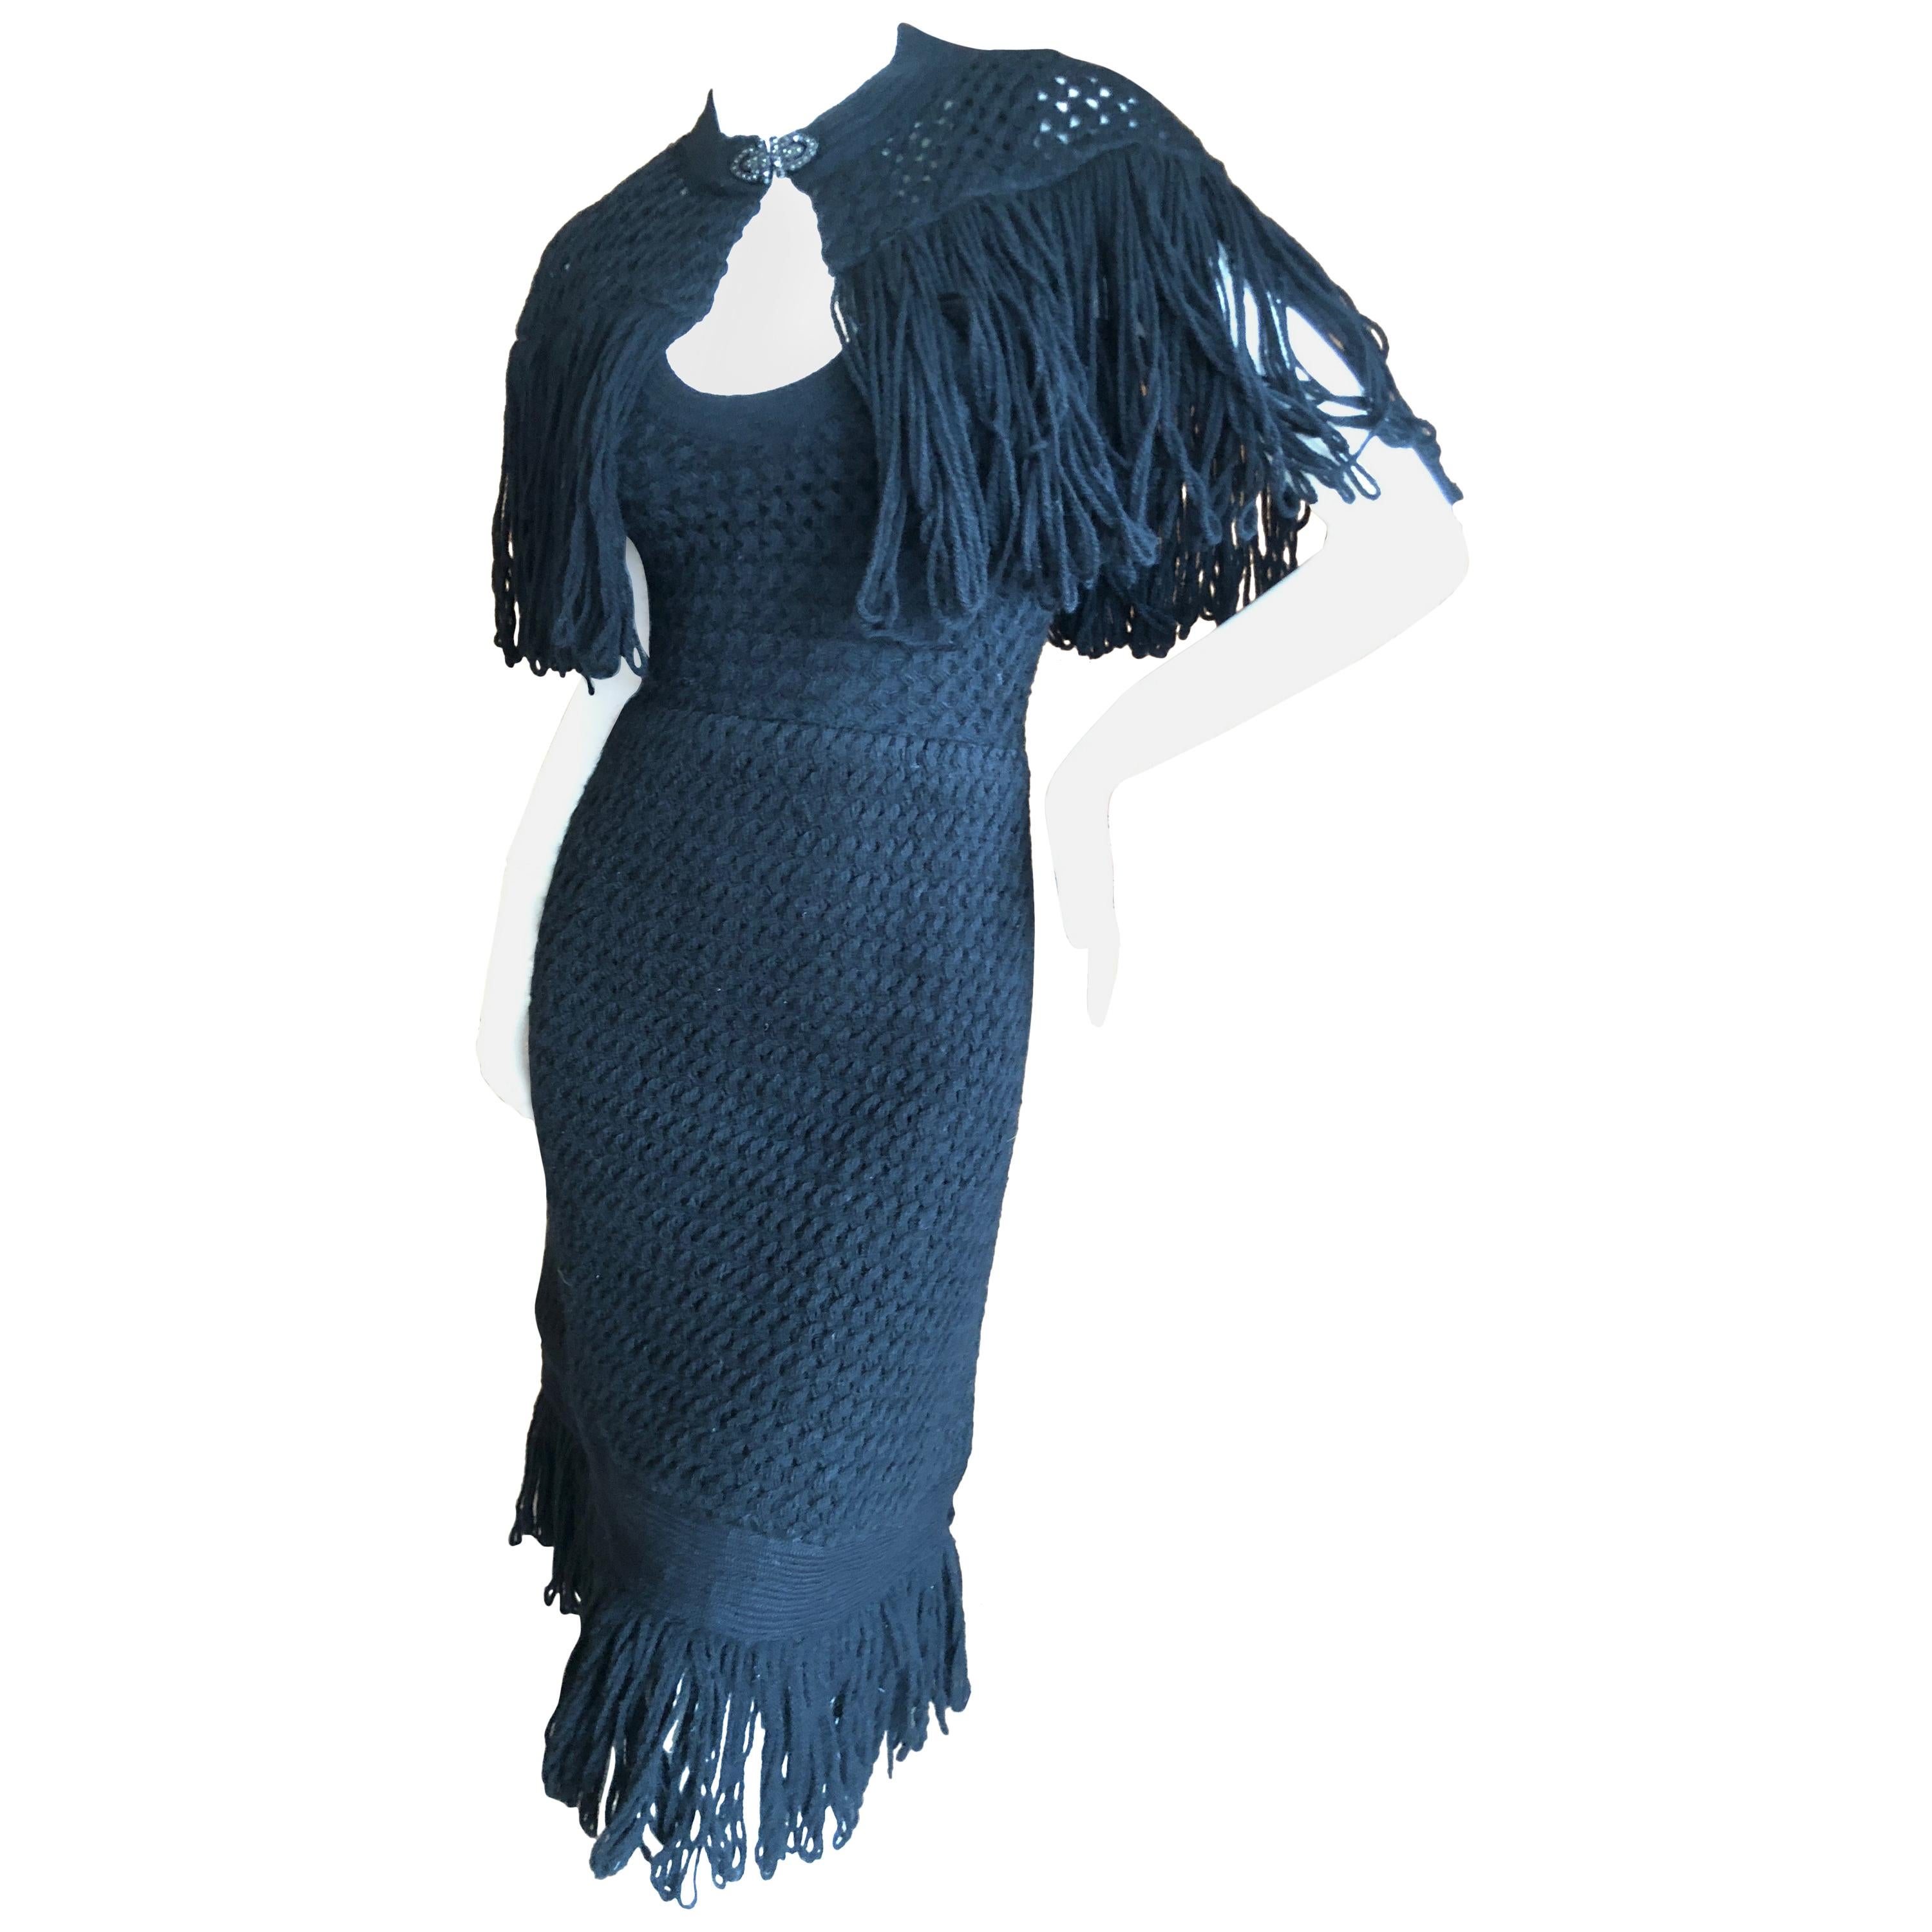 Cardinali Black Silk Lined Crochet Dress with Matching Fringed Shawl Fall 1971  For Sale